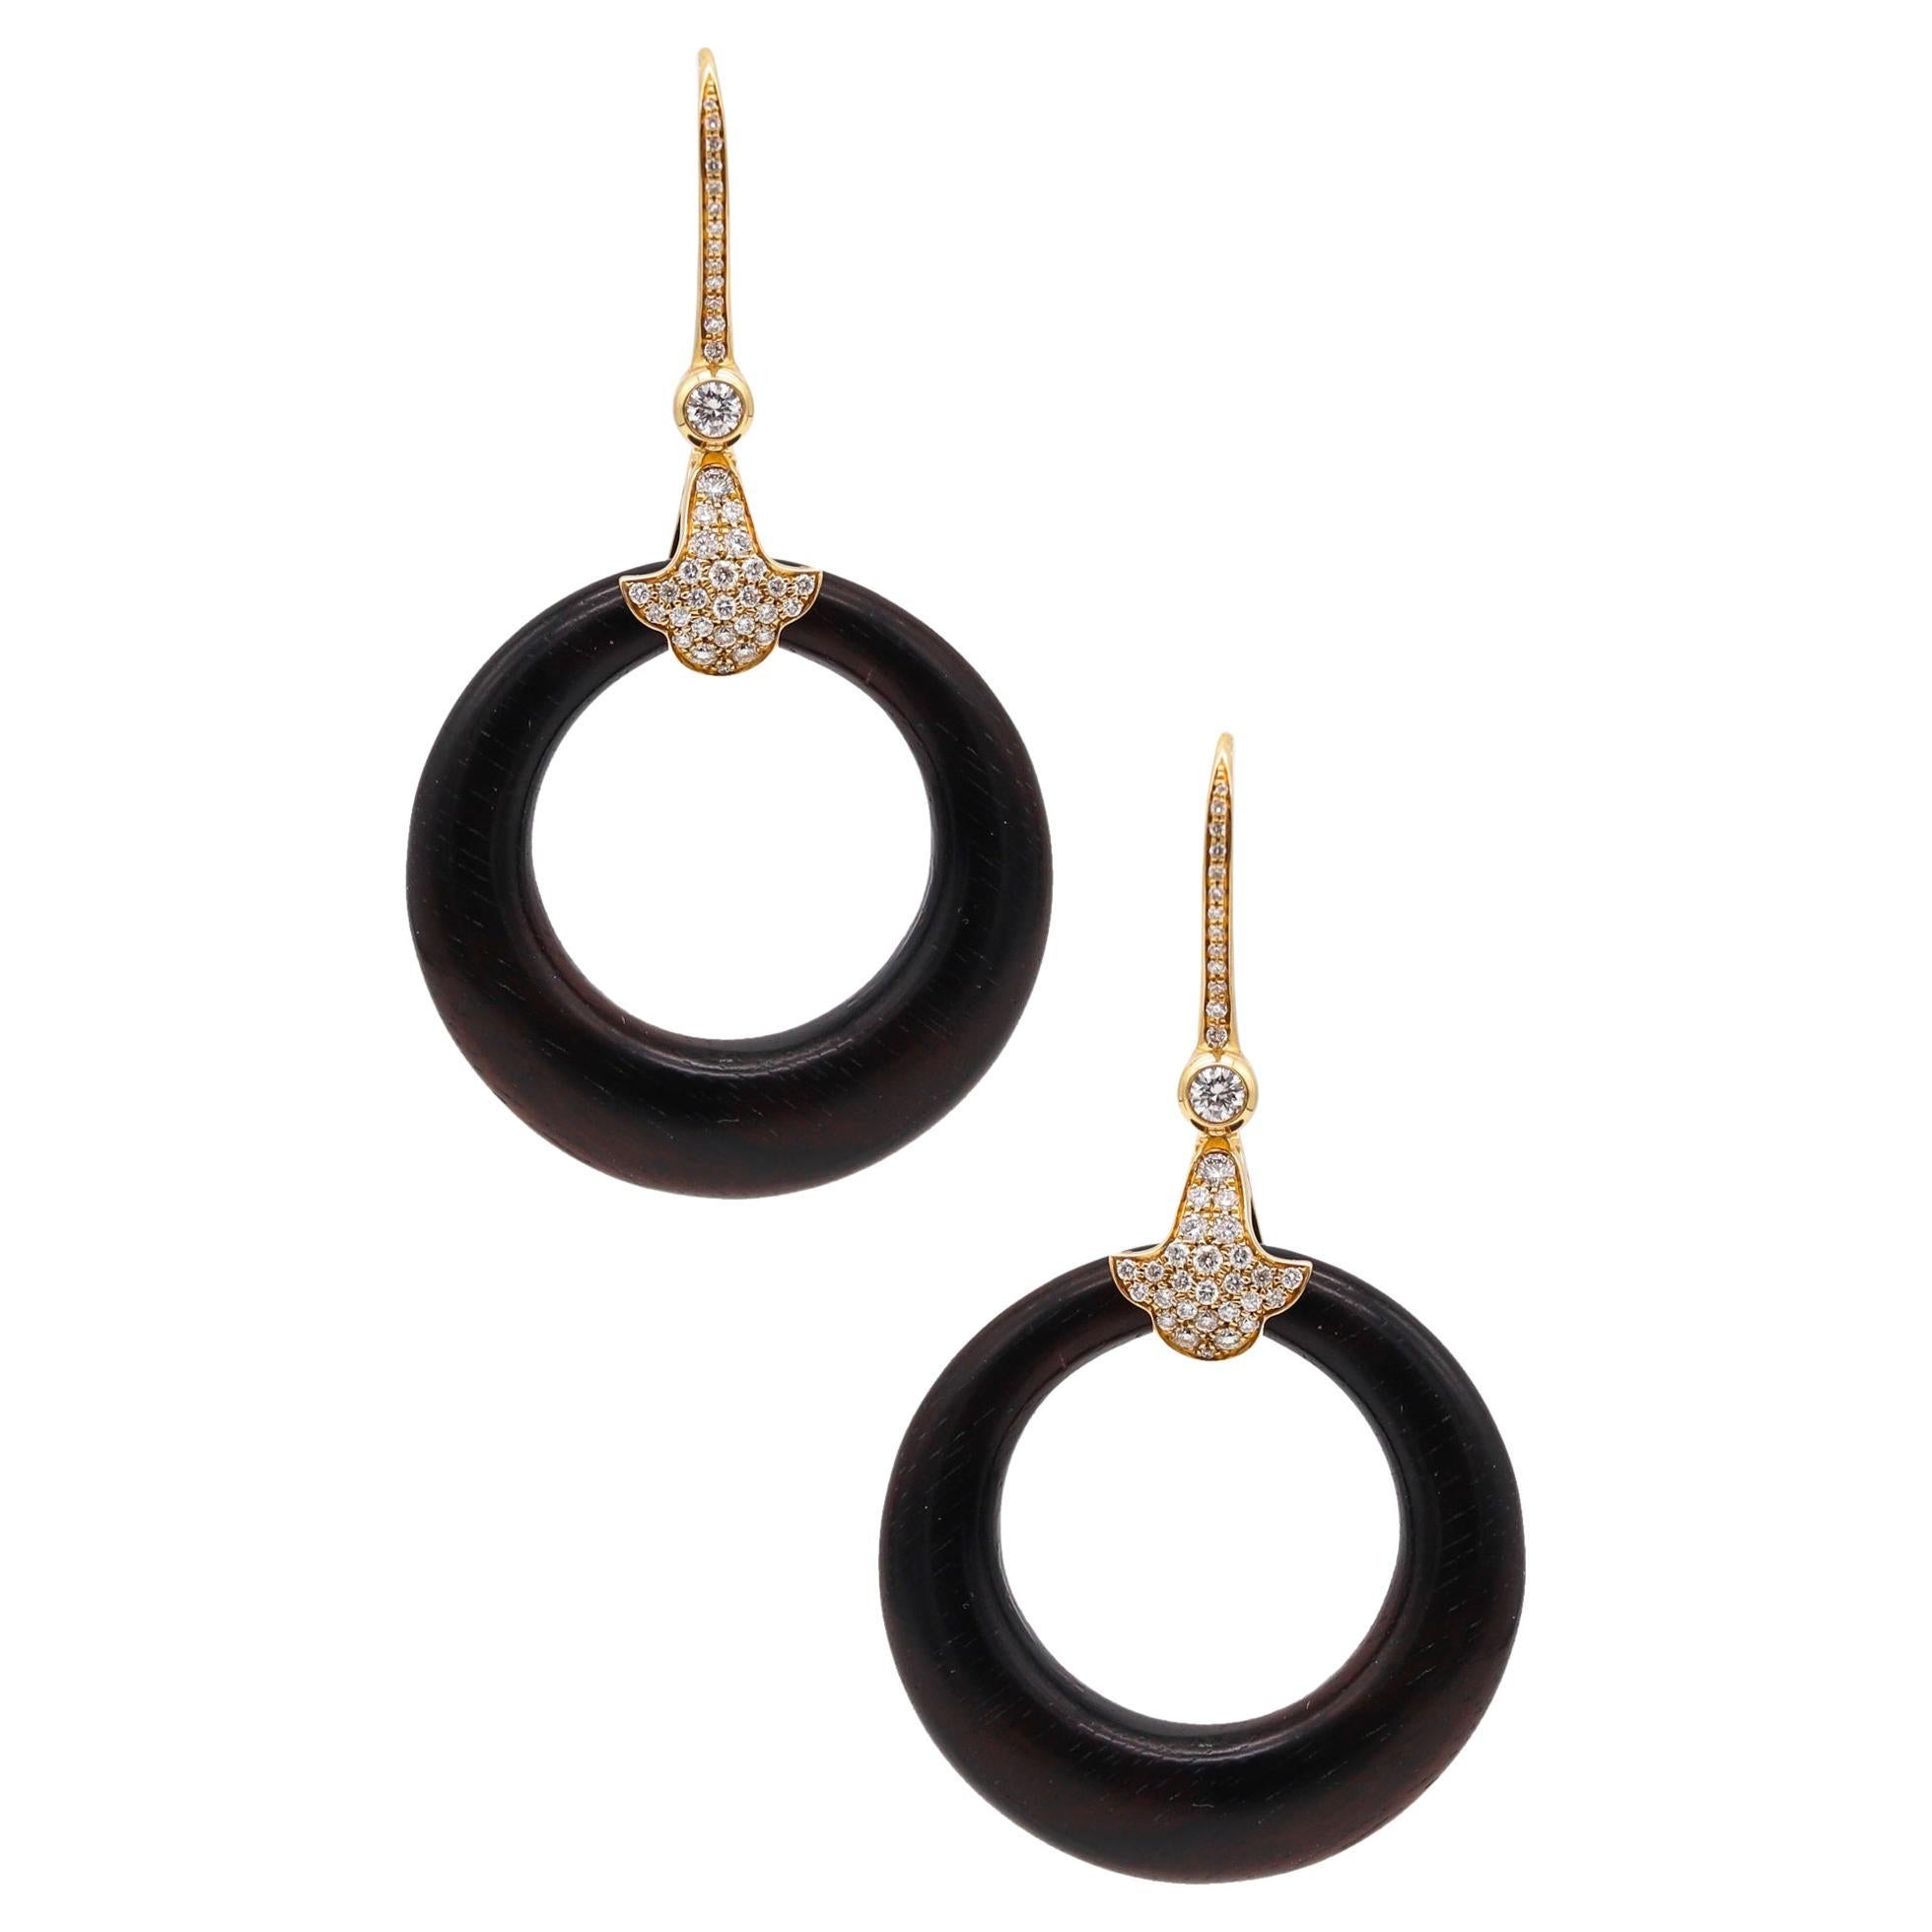 Marina B. Milan Convertible Wood Hoops Earrings 18Kt Gold With 1.84 Cts Diamonds